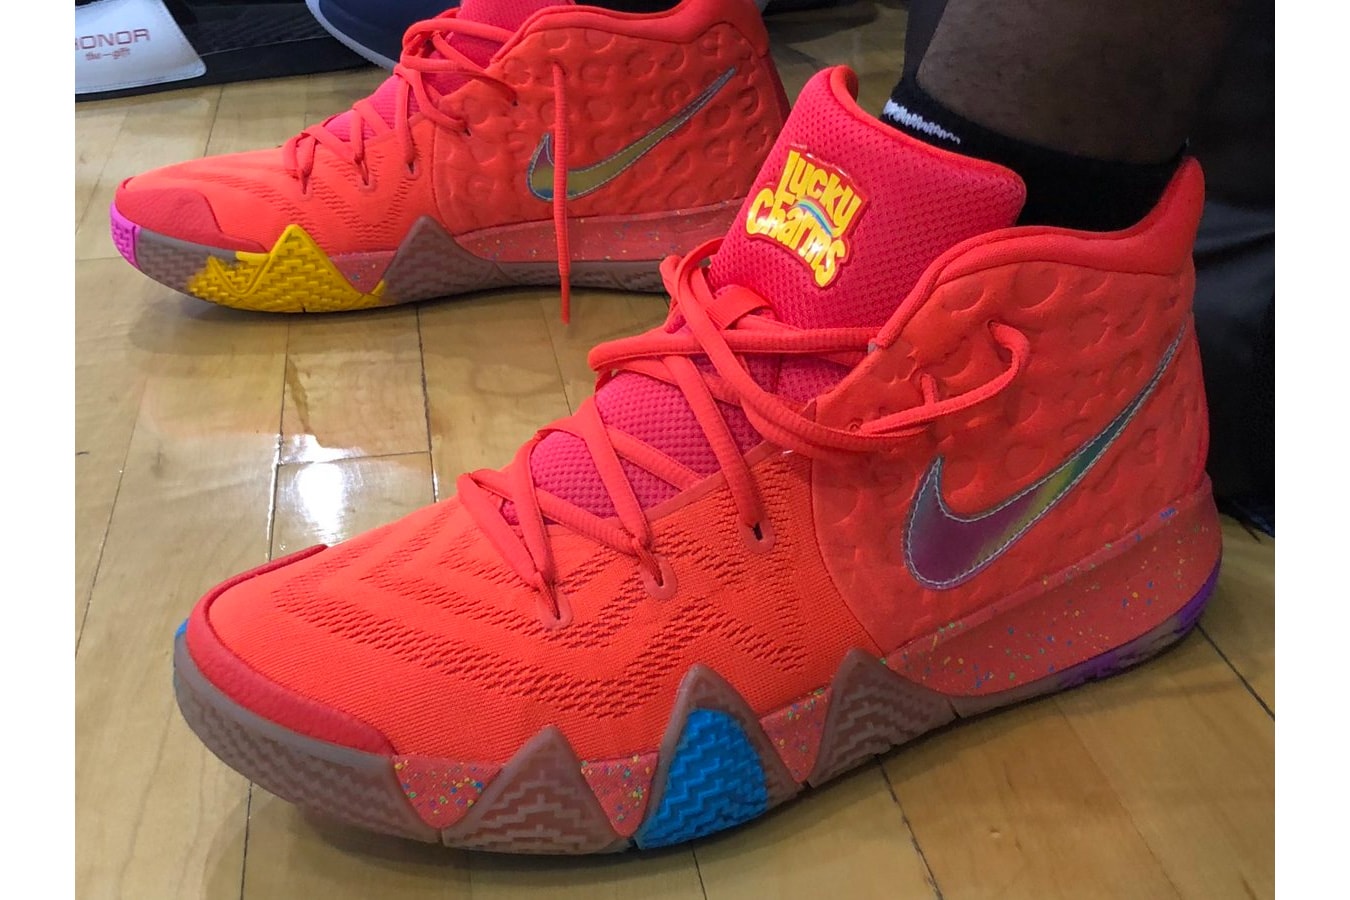 Nike Kyrie 4 "Lucky Charms" Closer Look Kyrie irving cereal pack general mills sneaker colorway